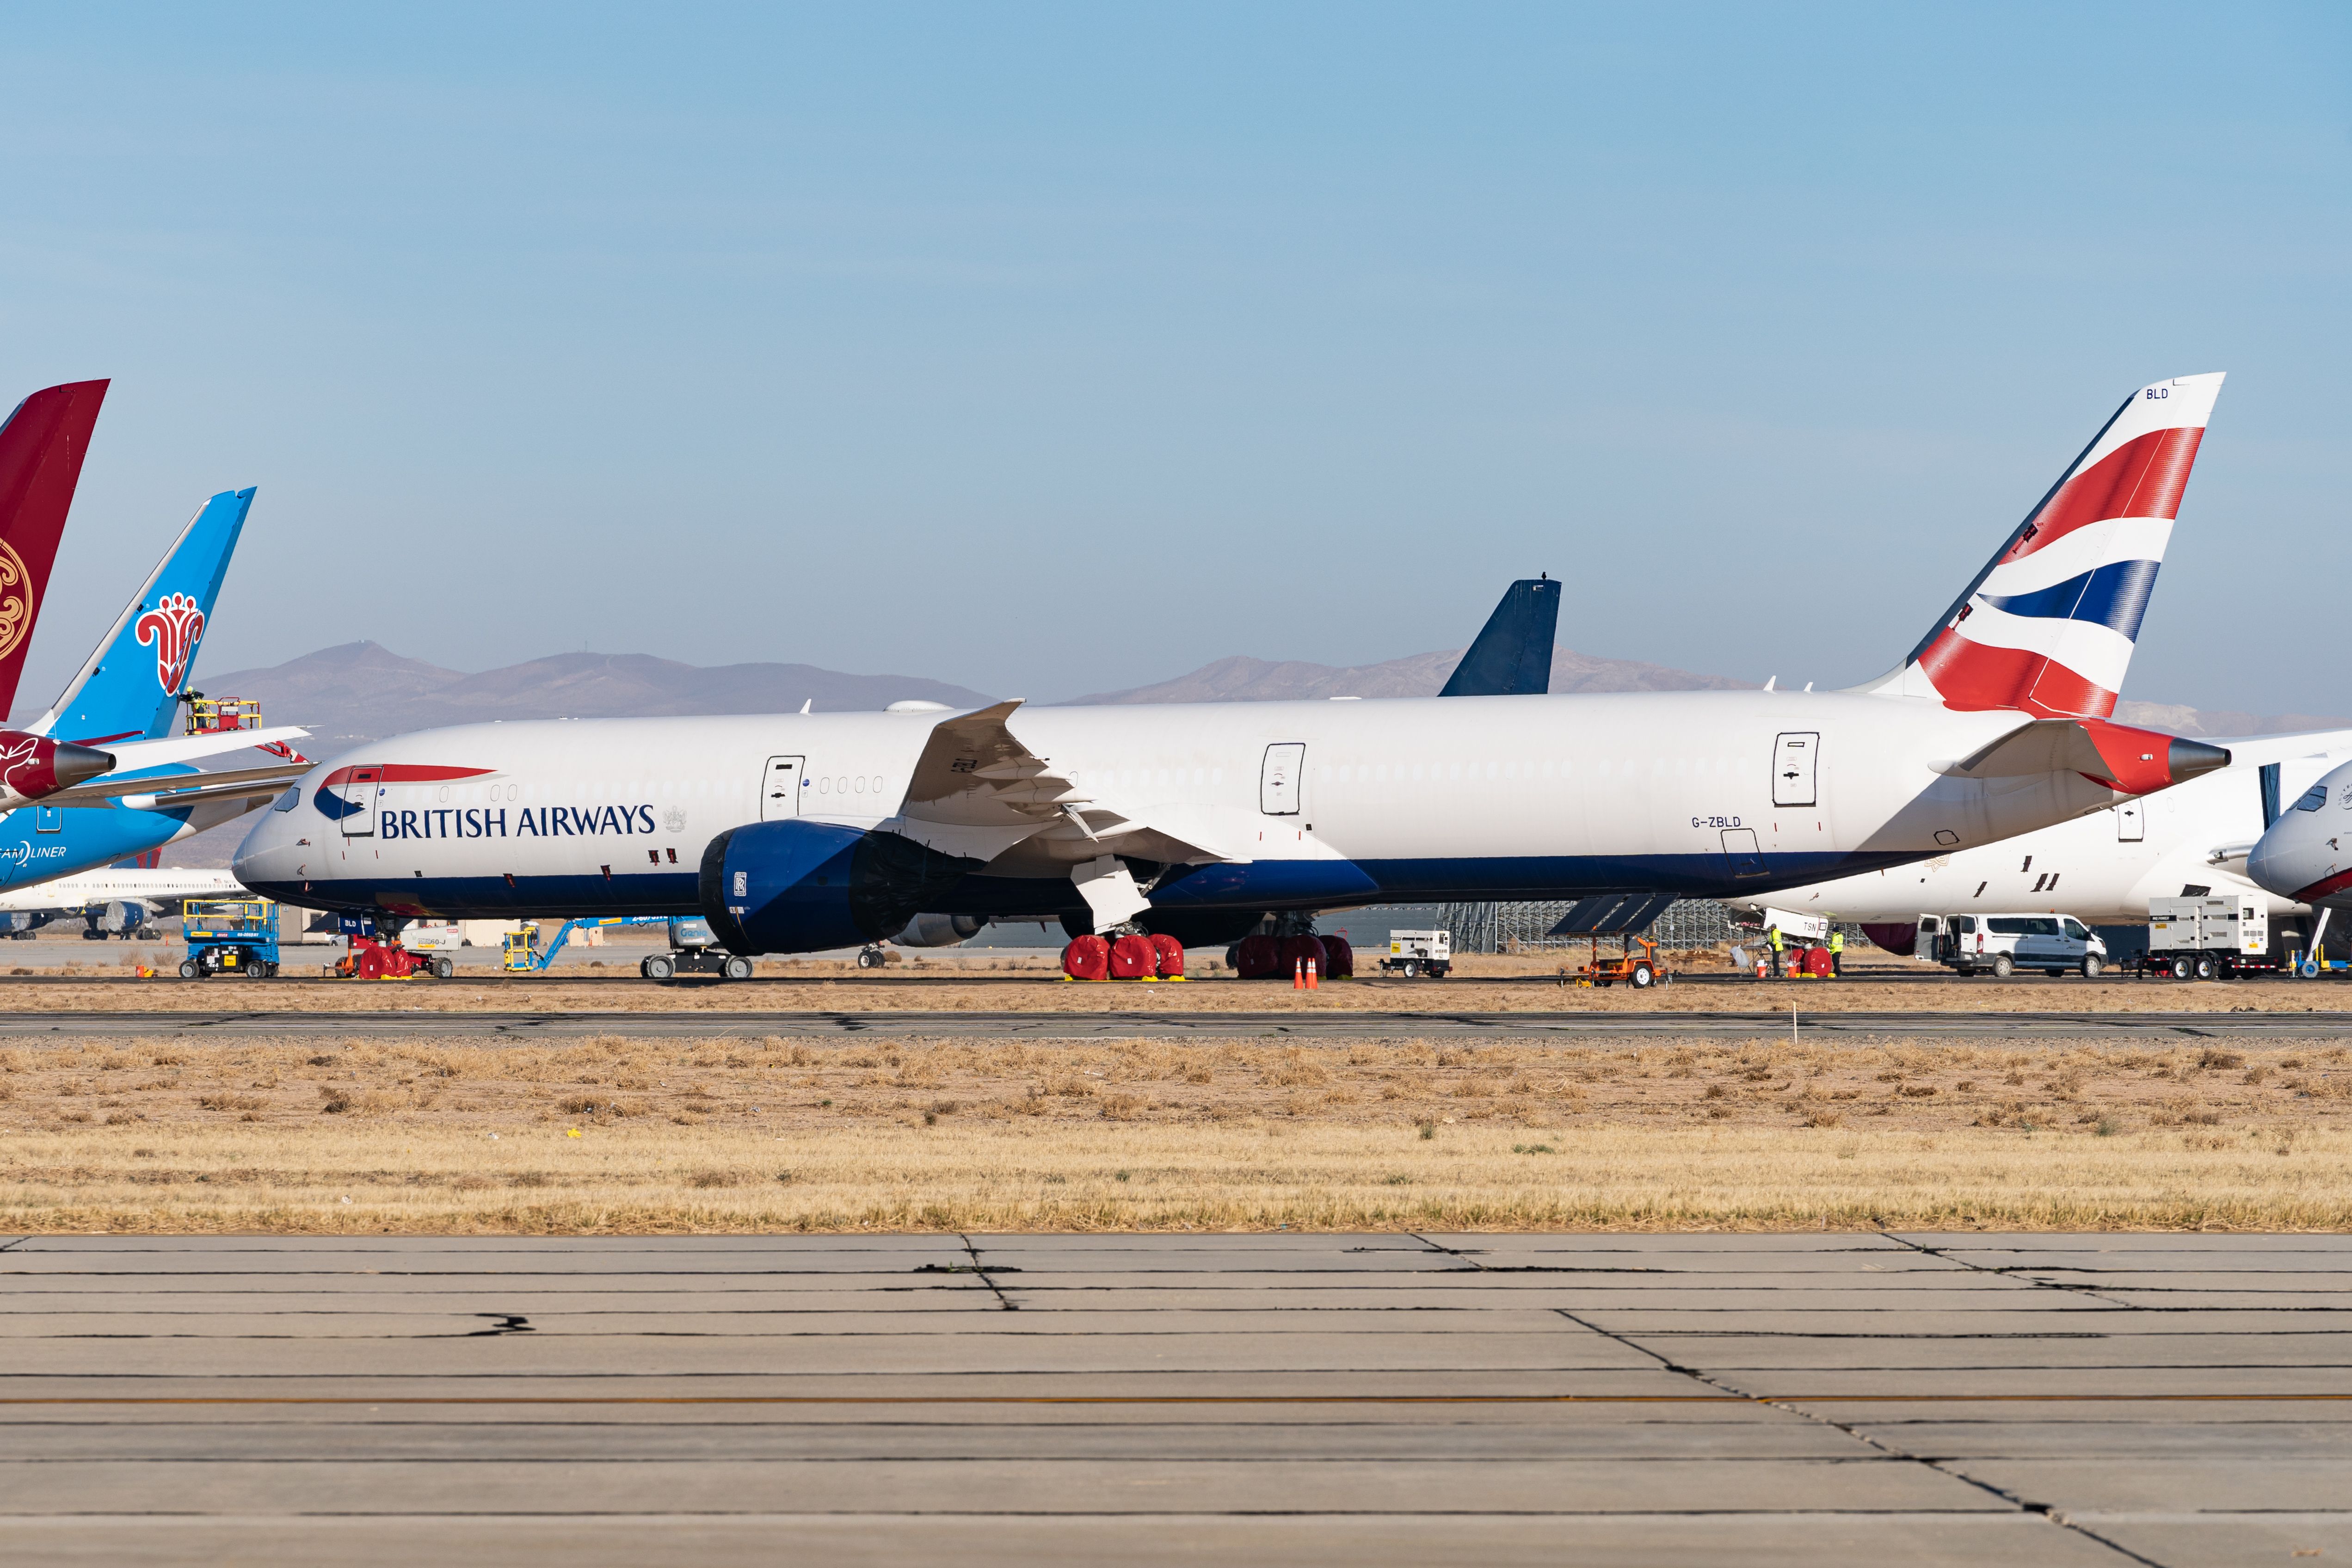 A retired British Airways Boeing 787-10 Dreamliner parked near several other aircraft from other airlines.